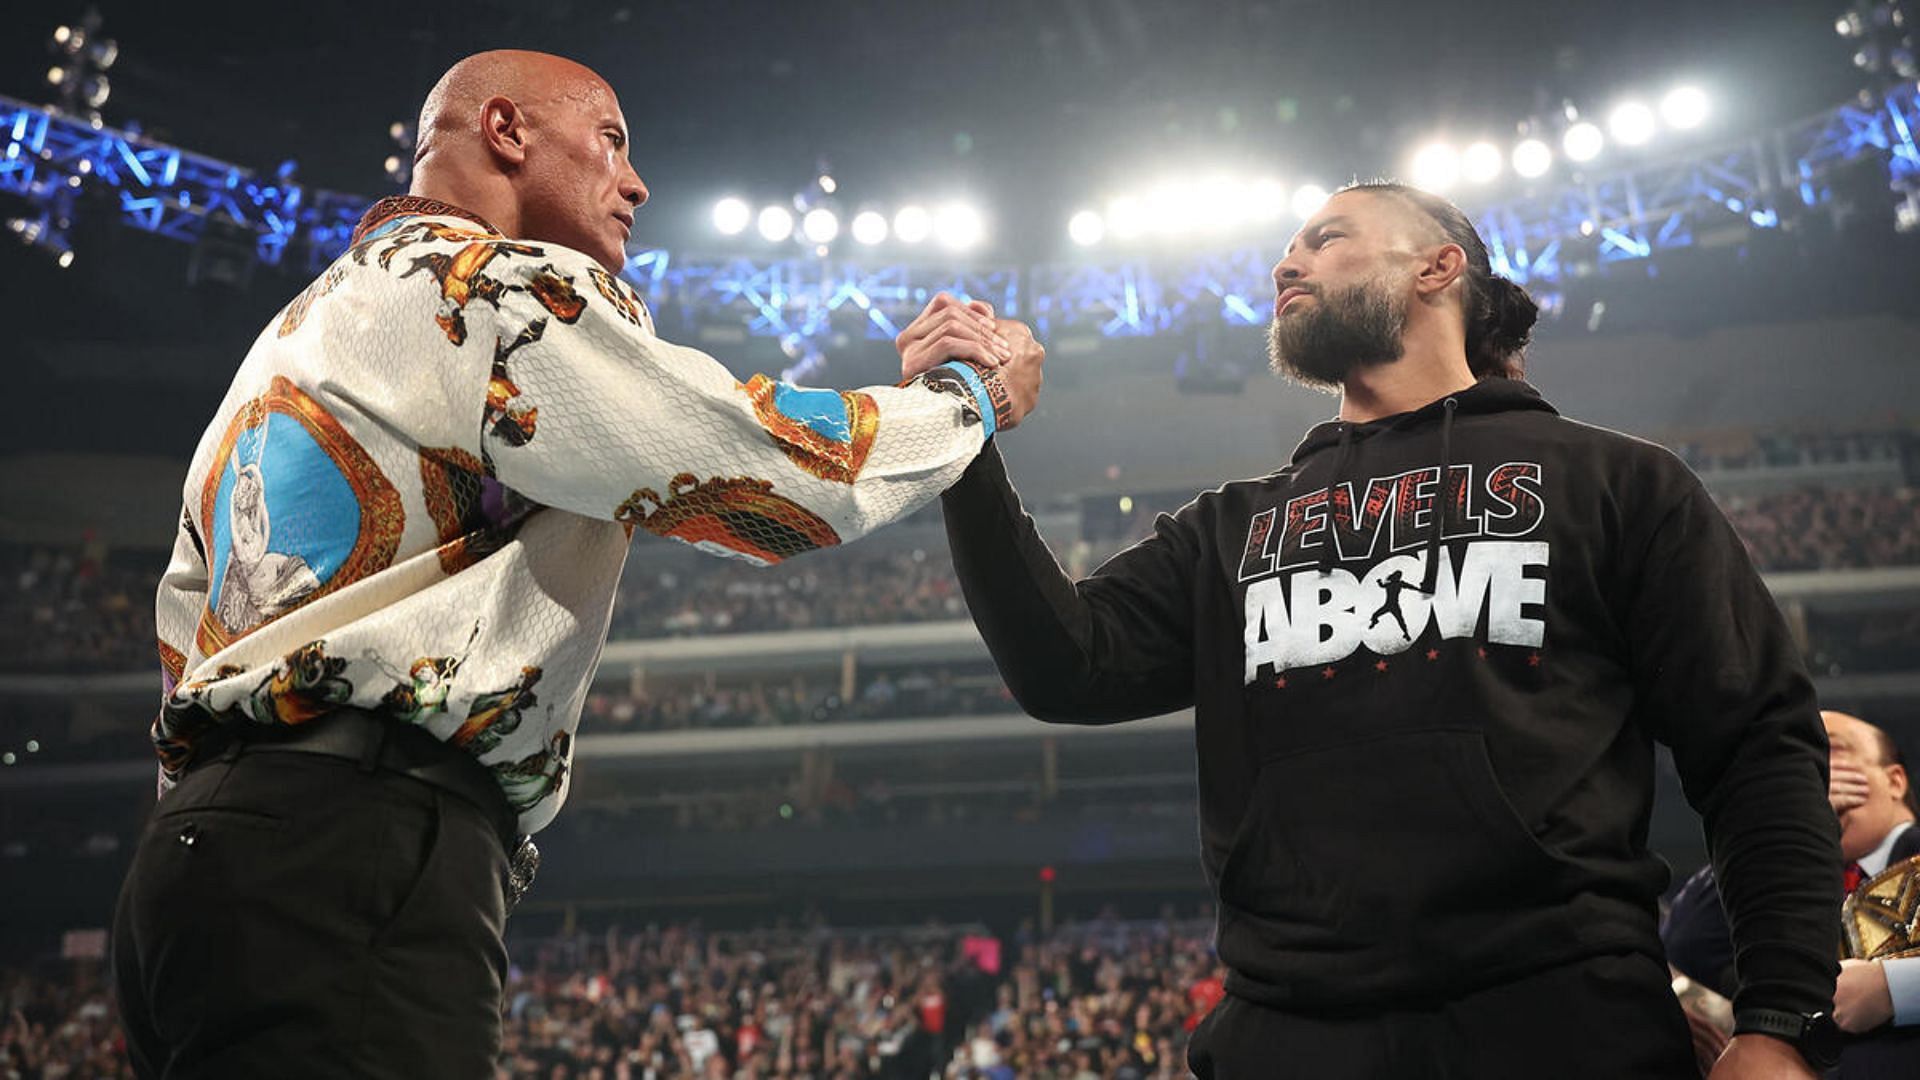 The Rock and Roman Reigns are set to team up at WrestleMania XL [Image credits: wwe.com]